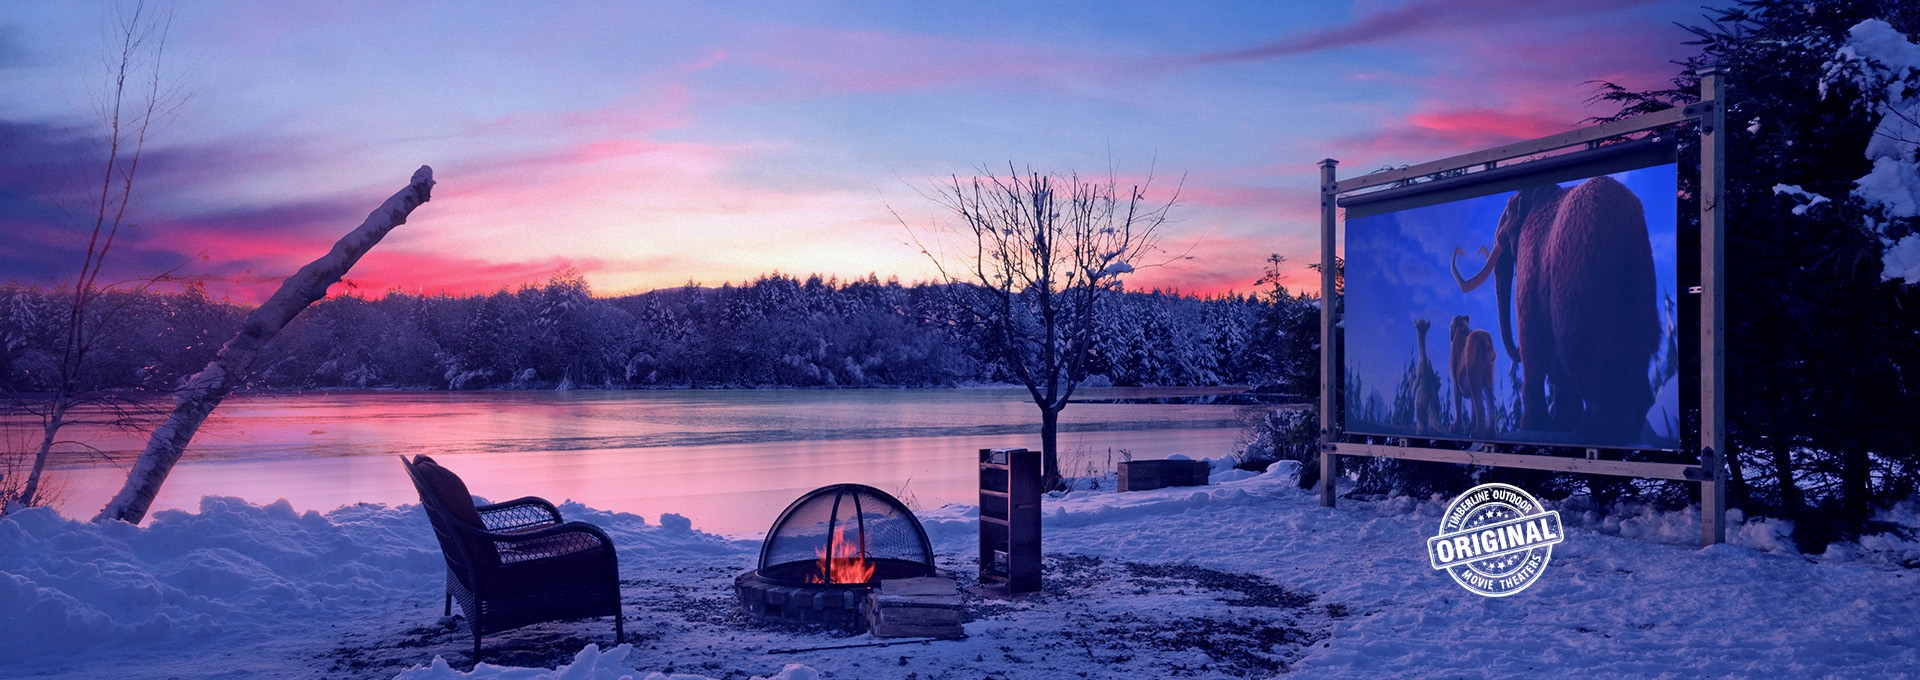 How to build an outdoor movie theater. Outdoor theater setup in front of a lake in the winter.